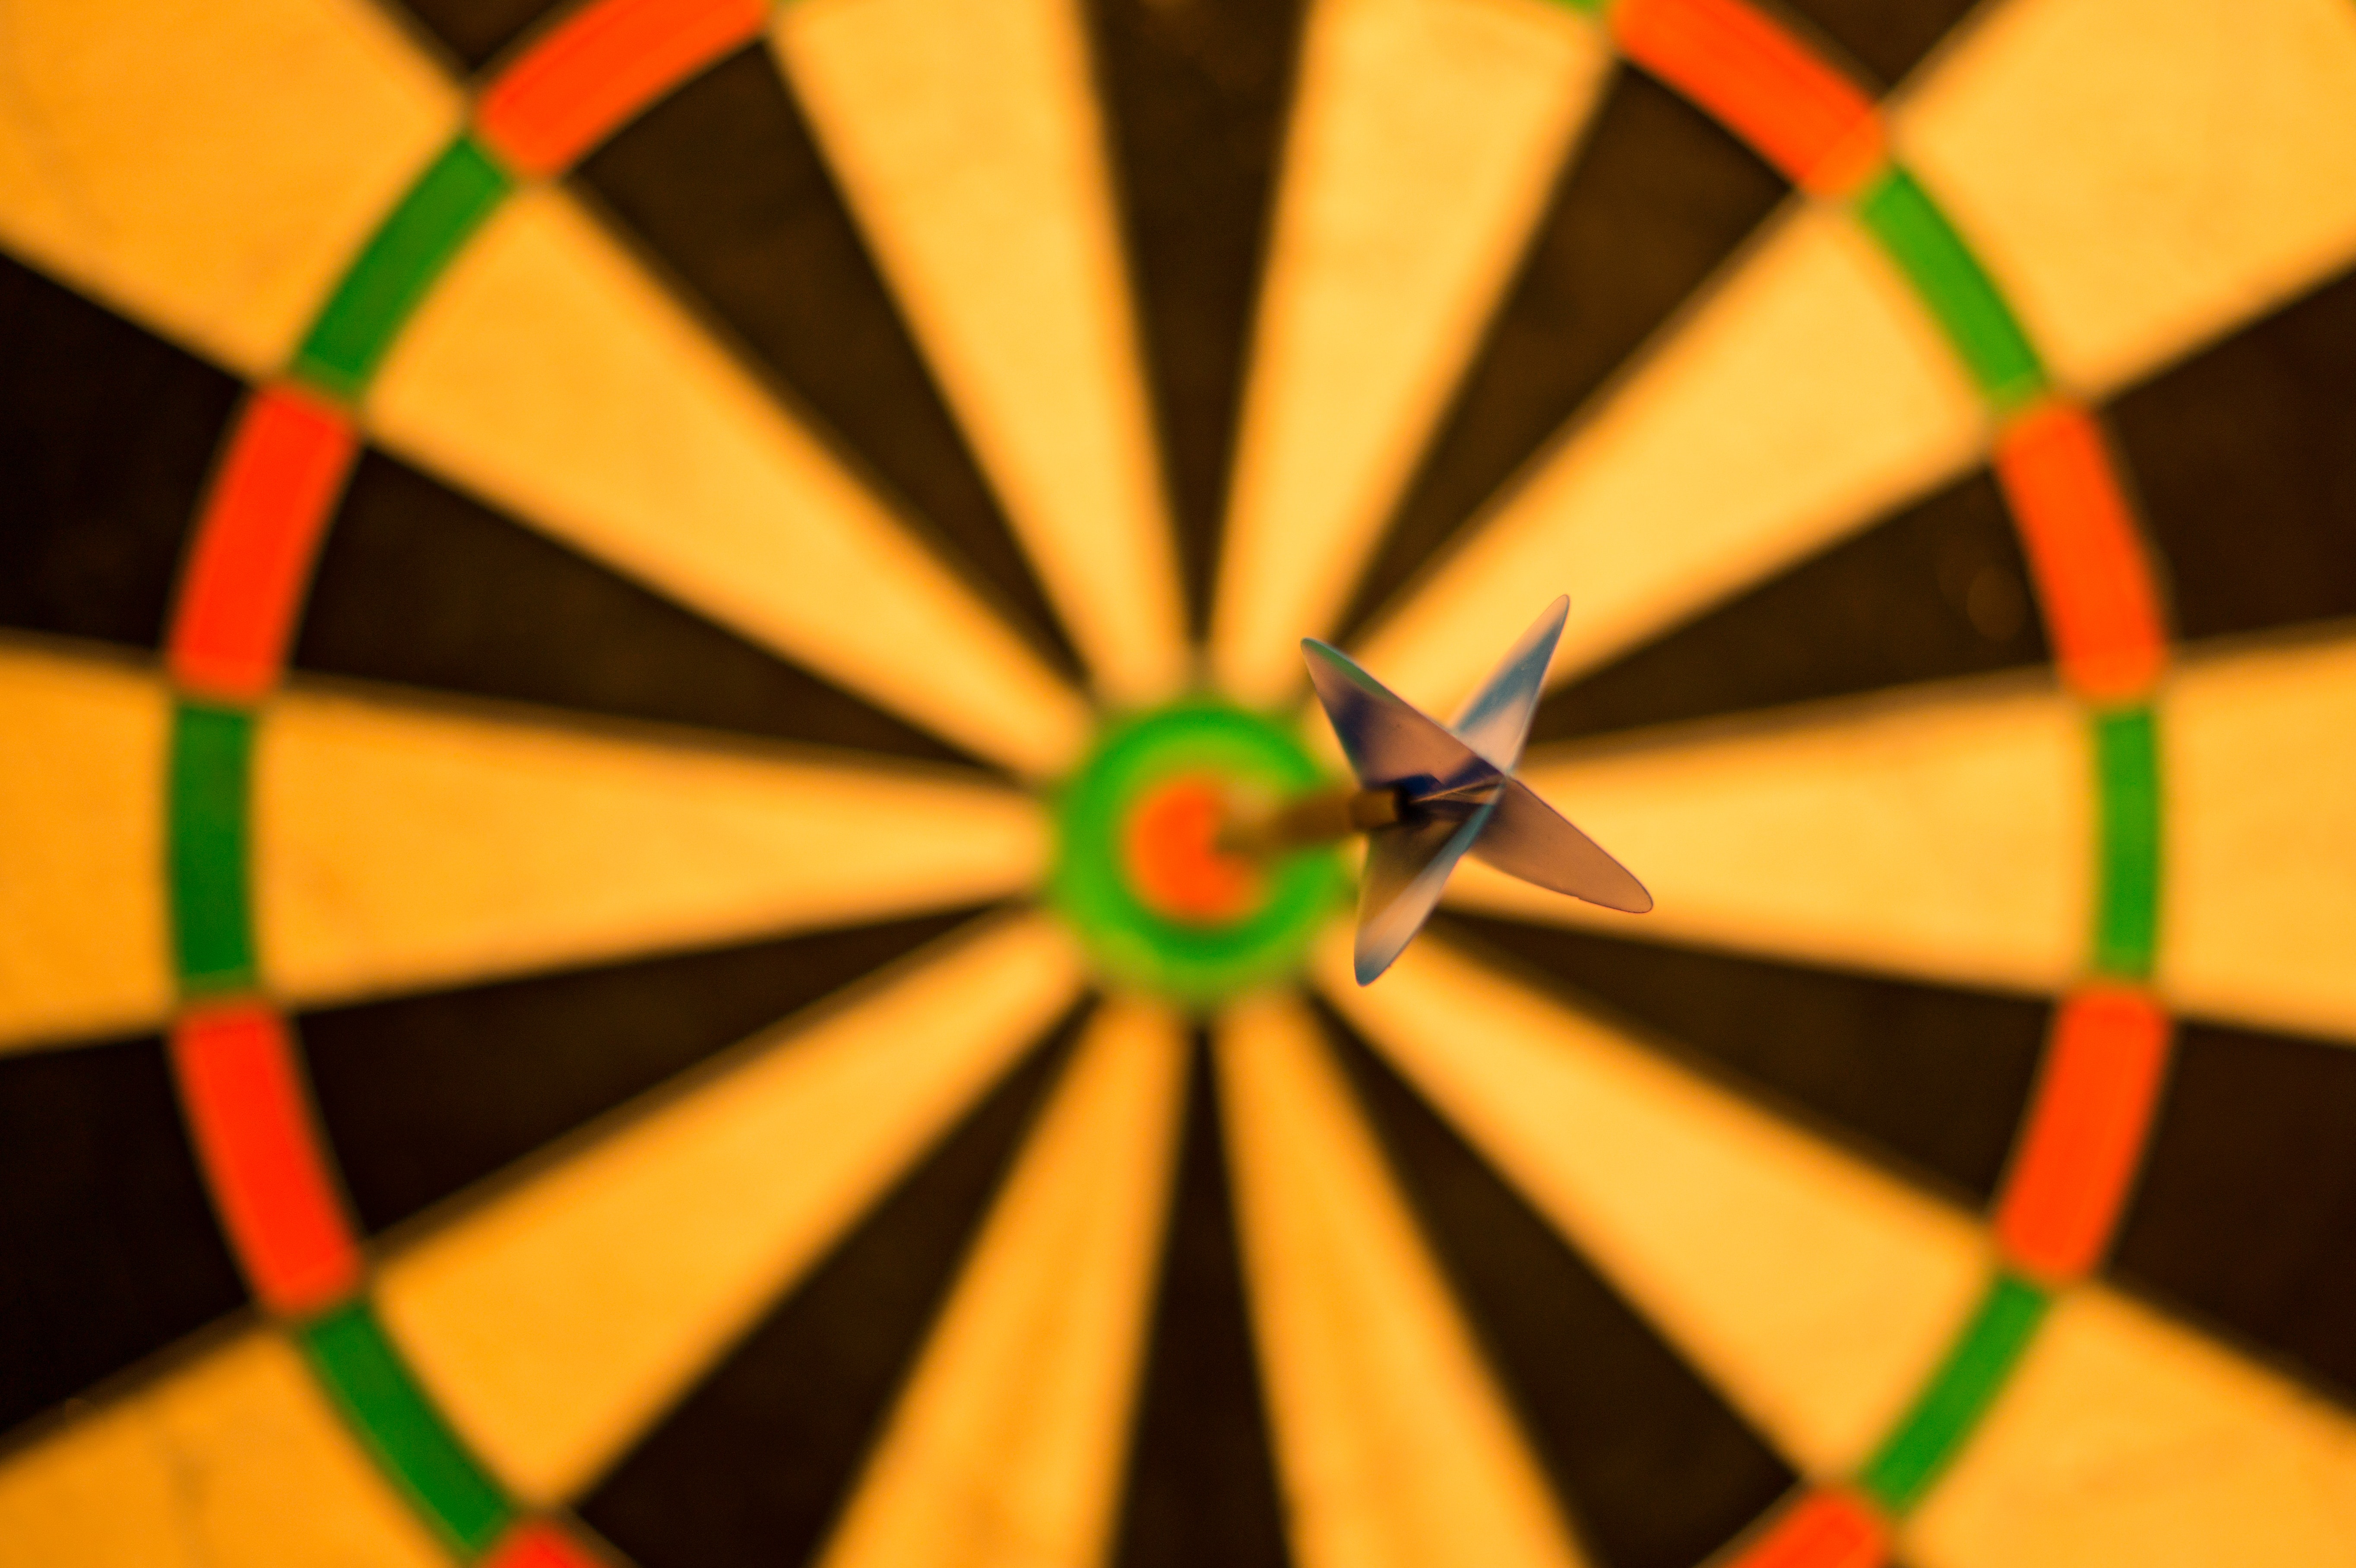 Image of a dart in the center of a dartboard